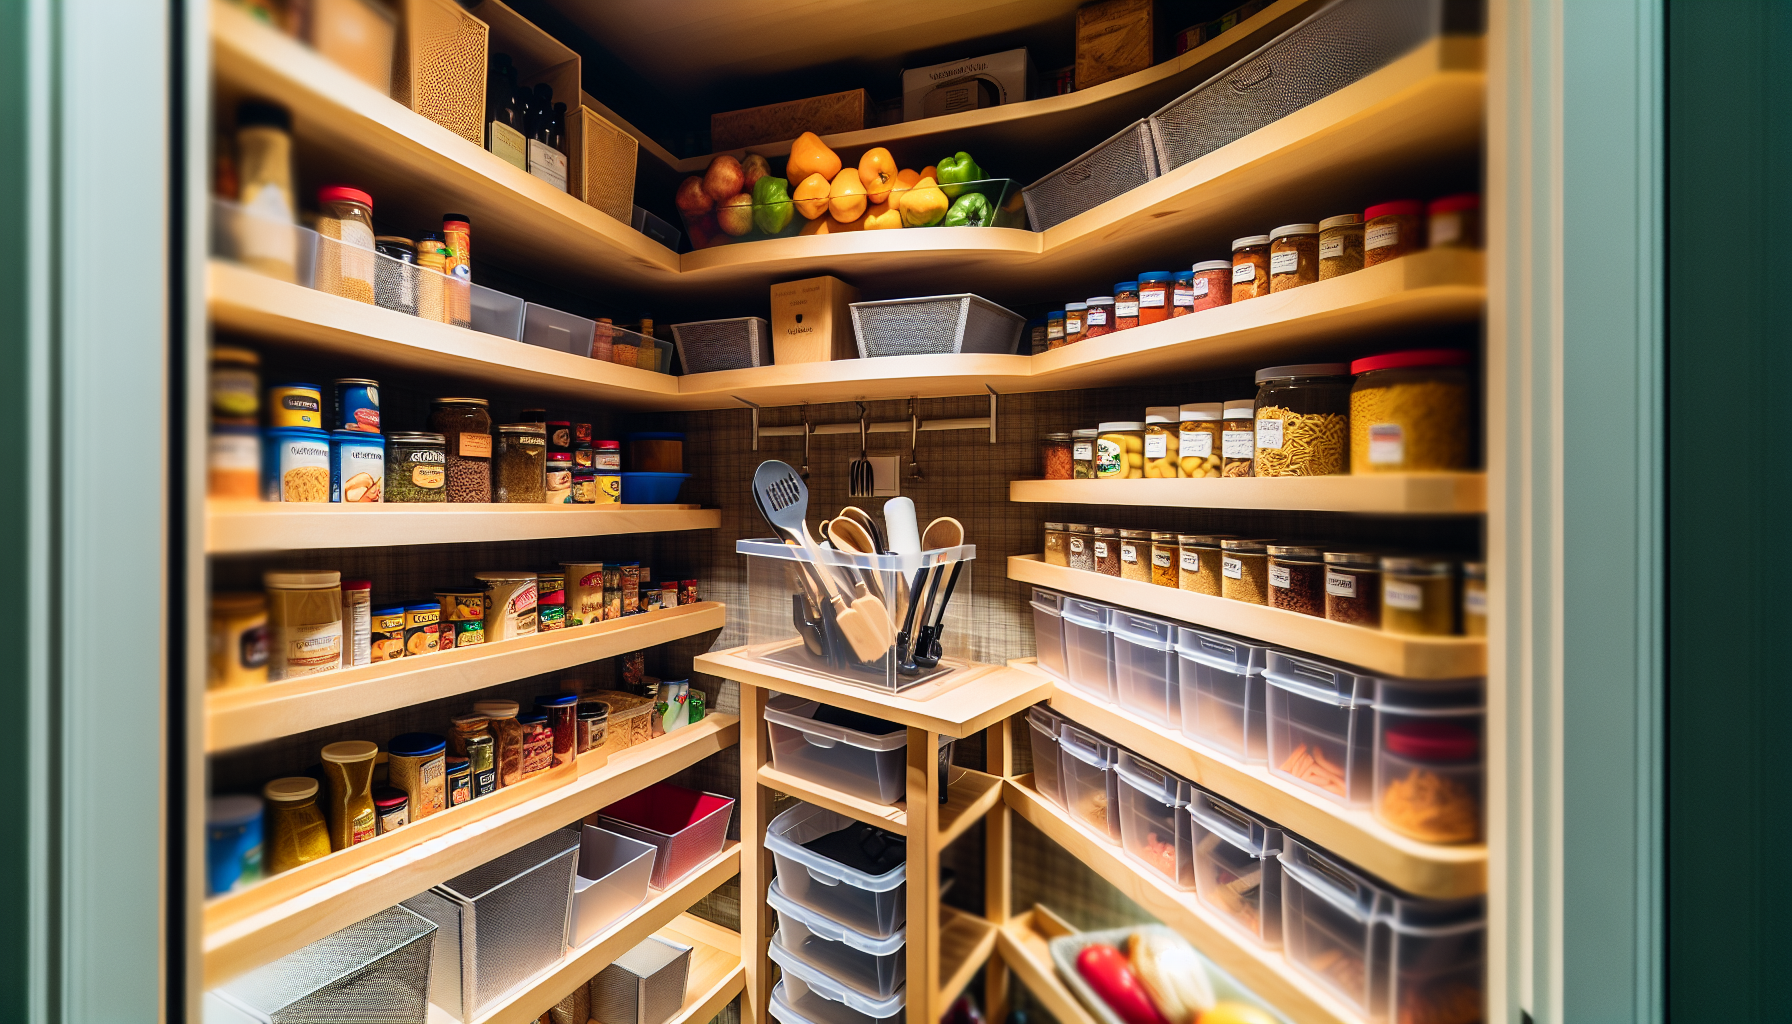 Efficient organization with thin shelves and clear bins in a small walk-in pantry